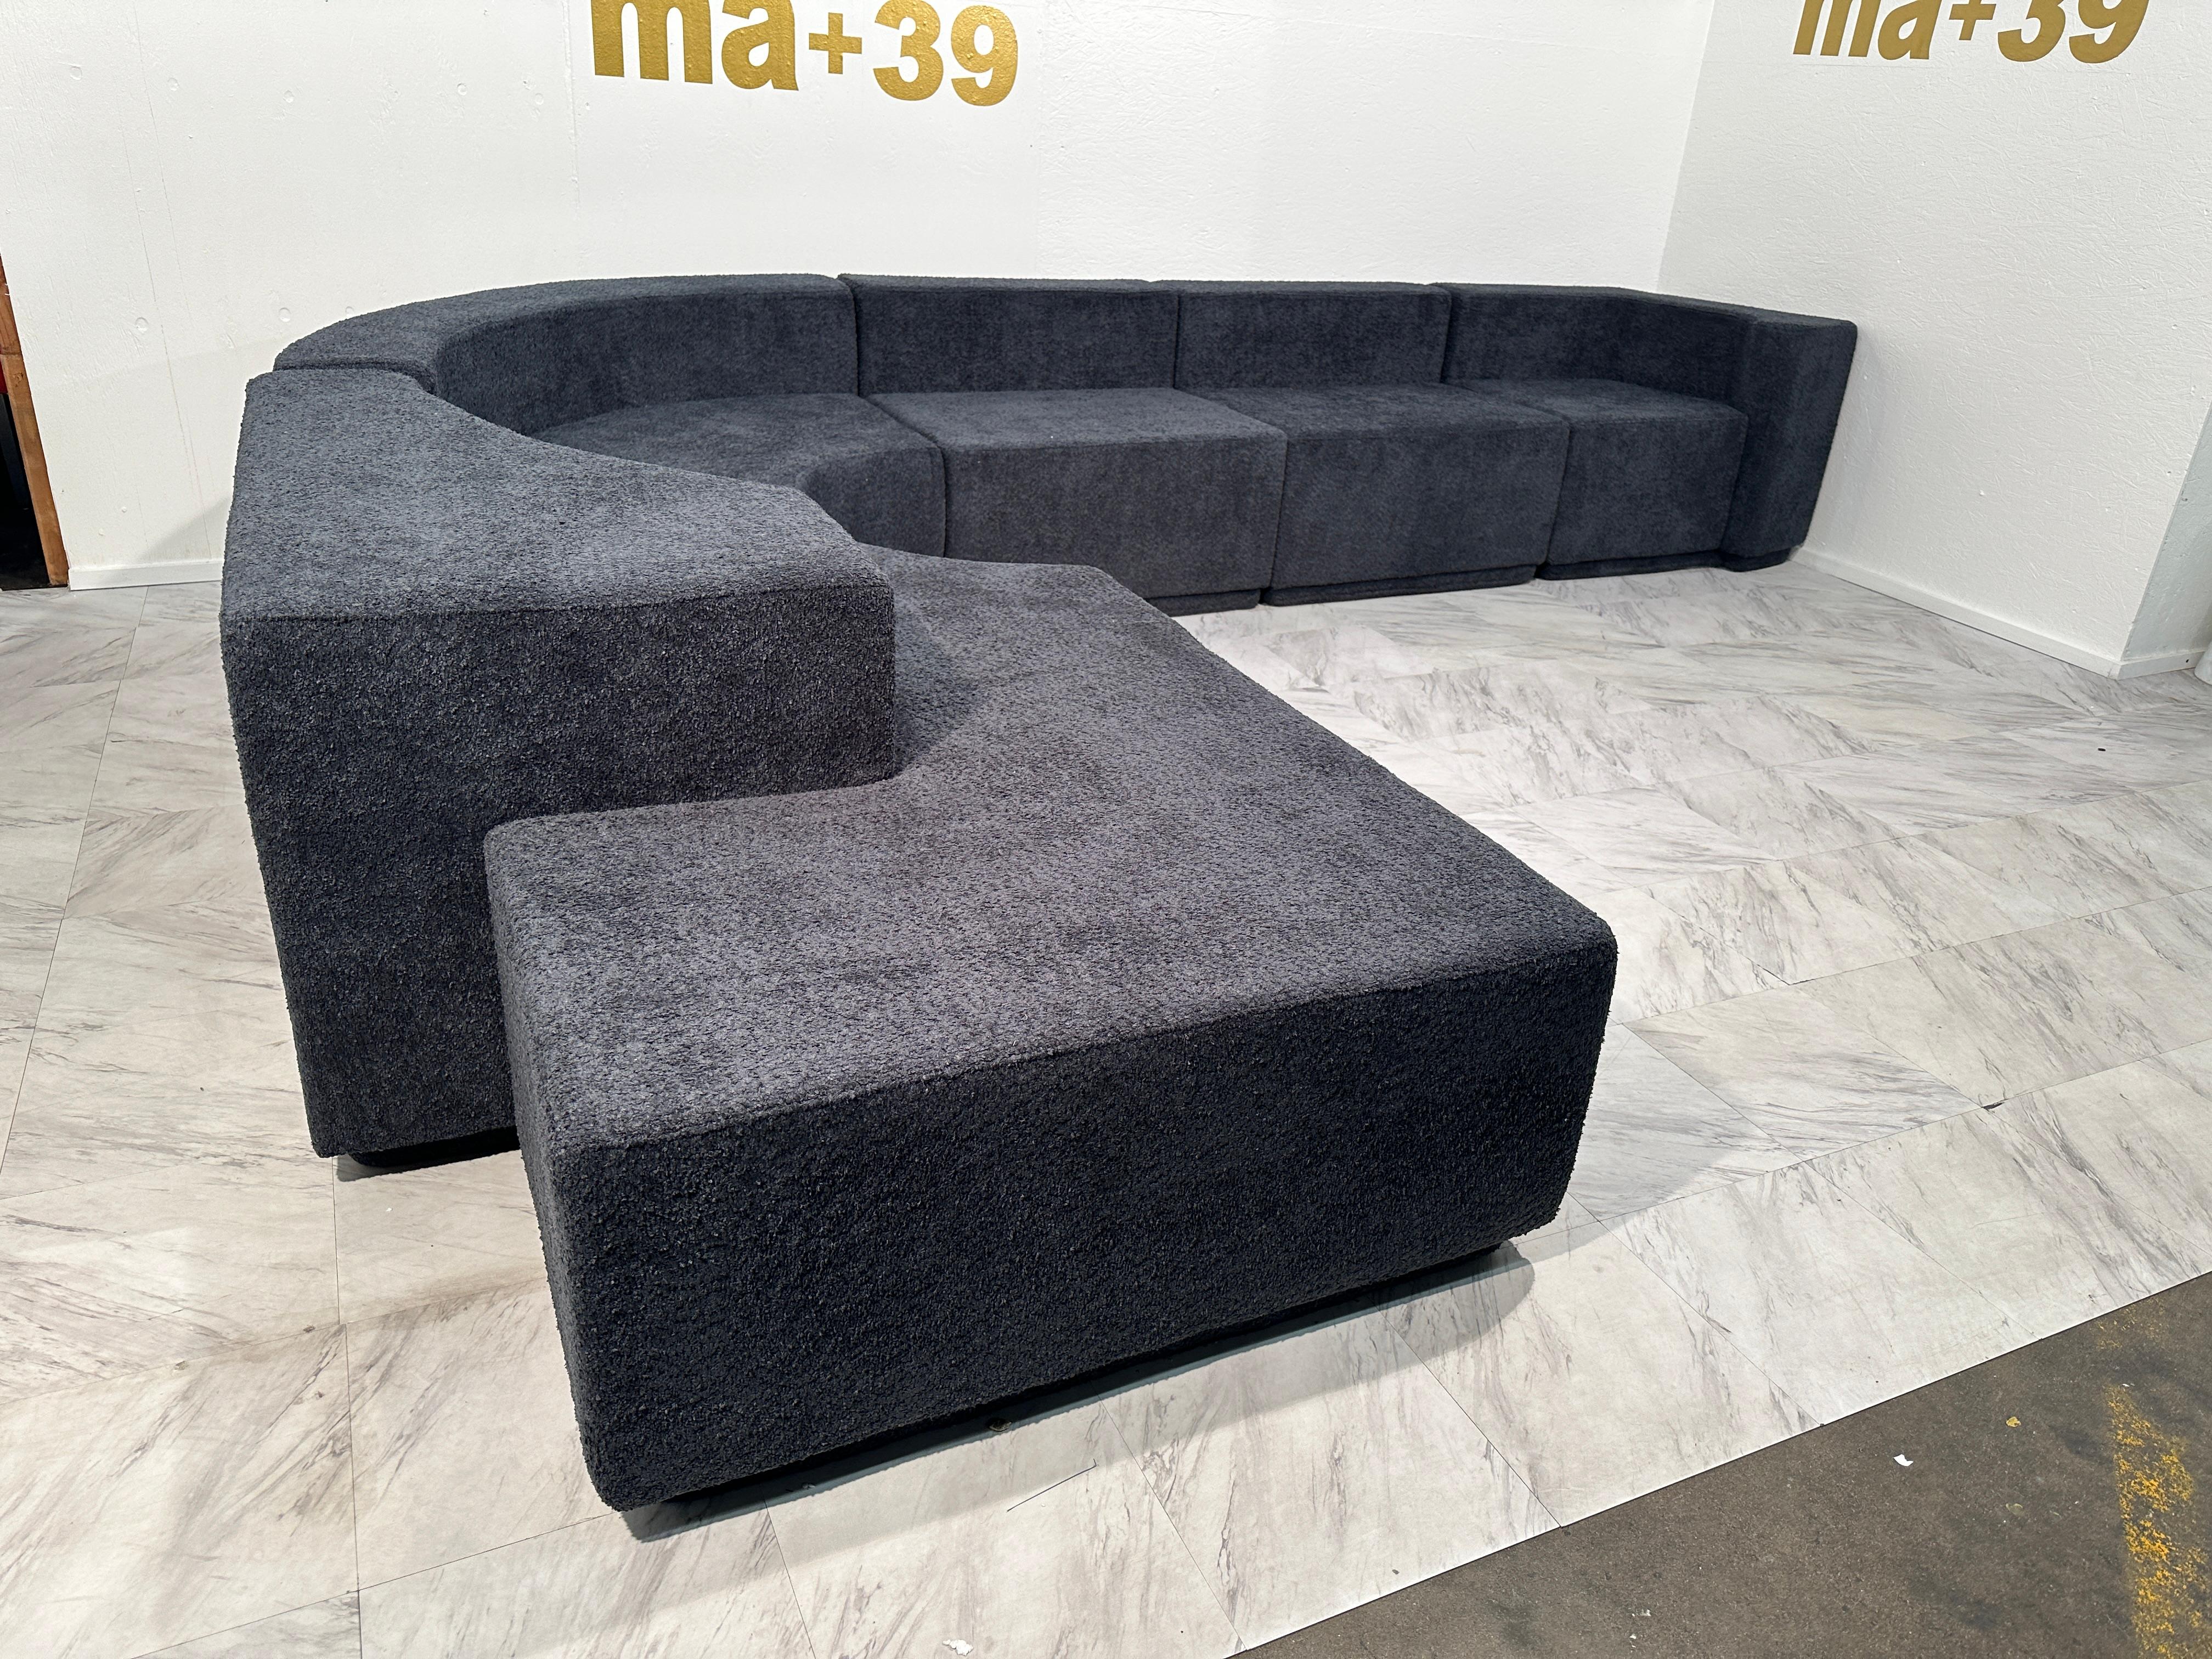 The Lara sofa, 1958 was designed by Roberto Pamio, Renato Toso and Noti Massari for Stilwood. Pamio and

Toso were close collaborators. Joined by Massari for the sofa project they appear to develop ideas led by Pierre Paulin, creating completely new